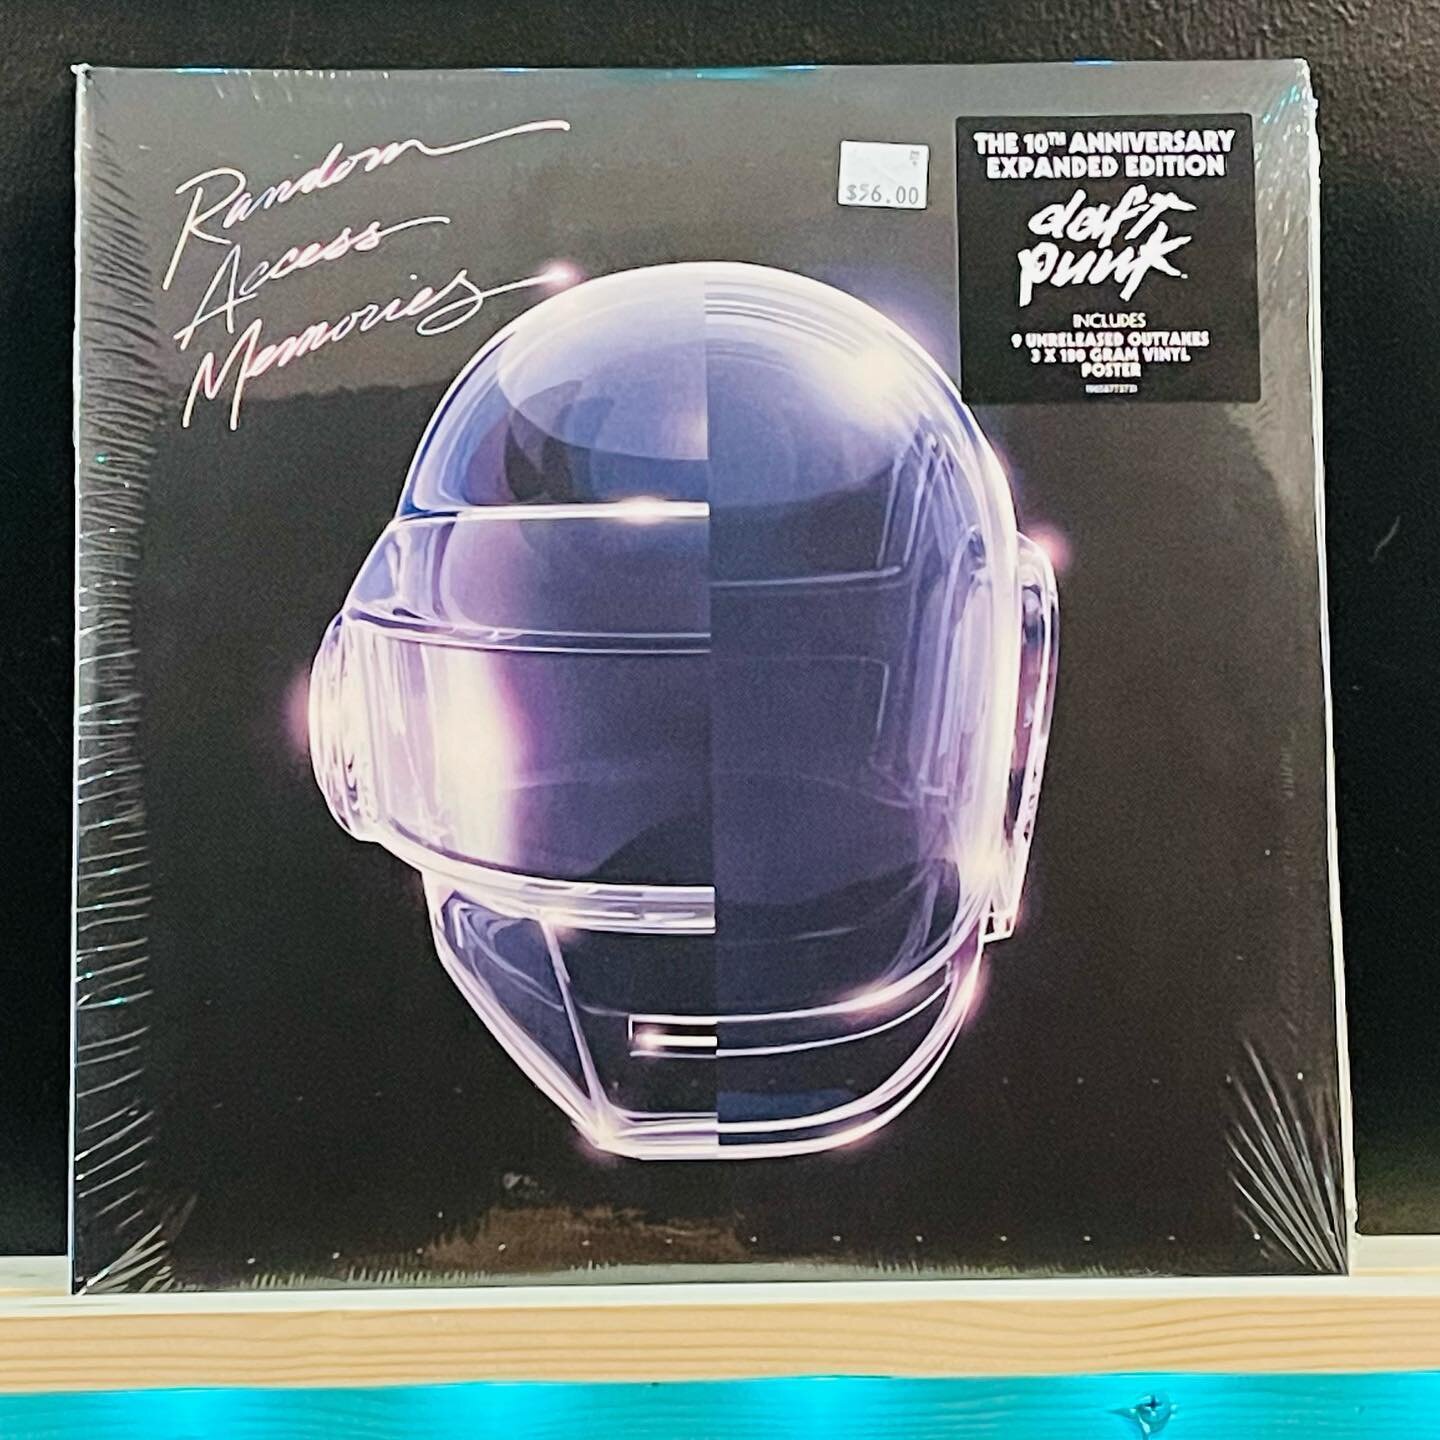 Daft Punk - &ldquo;Random Access Memories&rdquo; 10 year anniversary edition! Out today! Available at both shops! @remixrecordshop @remixrecordshopsouth @daftpunk #daftpunk #randomaccessmemories